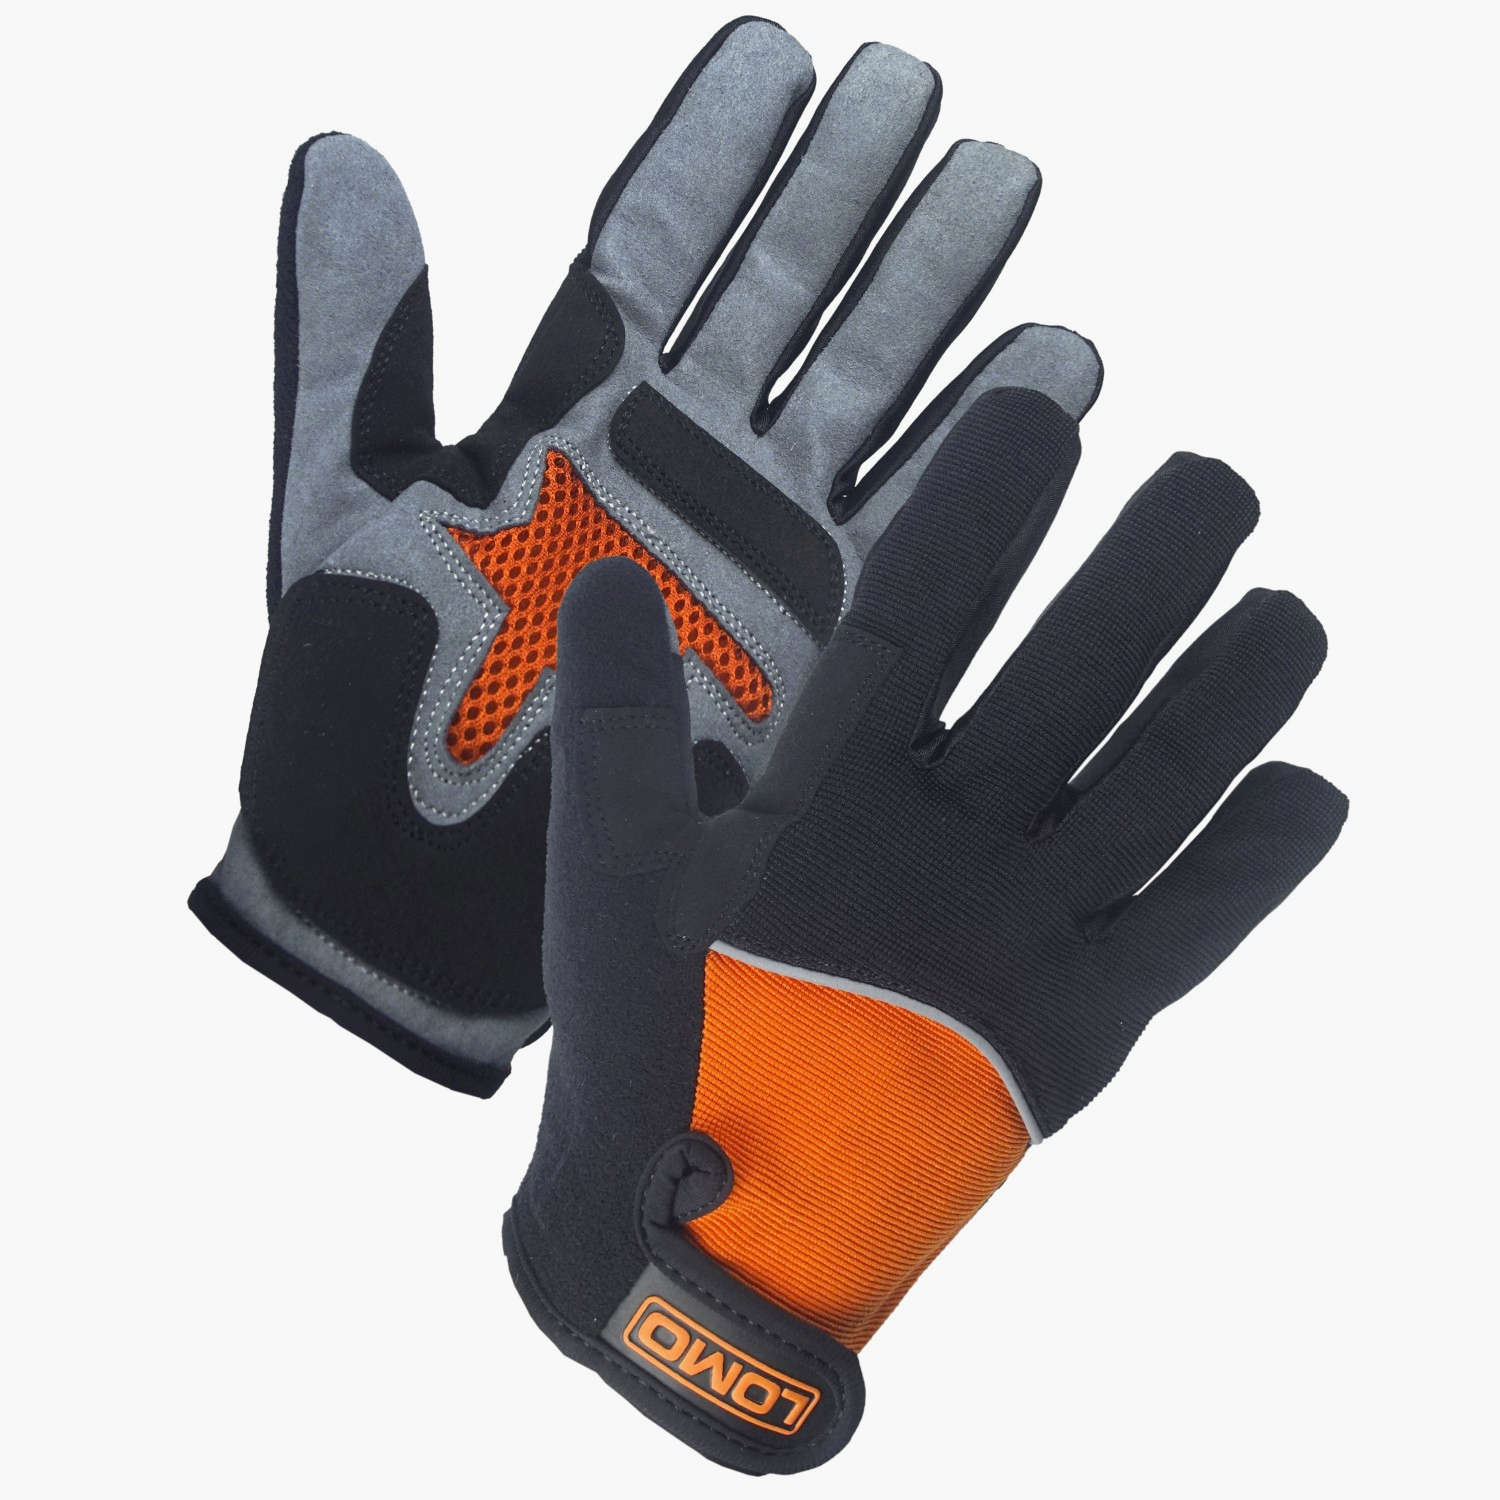 Mountain Bike Gloves | Lomo Watersport UK. Wetsuits, Dry Bags & Outdoor ...